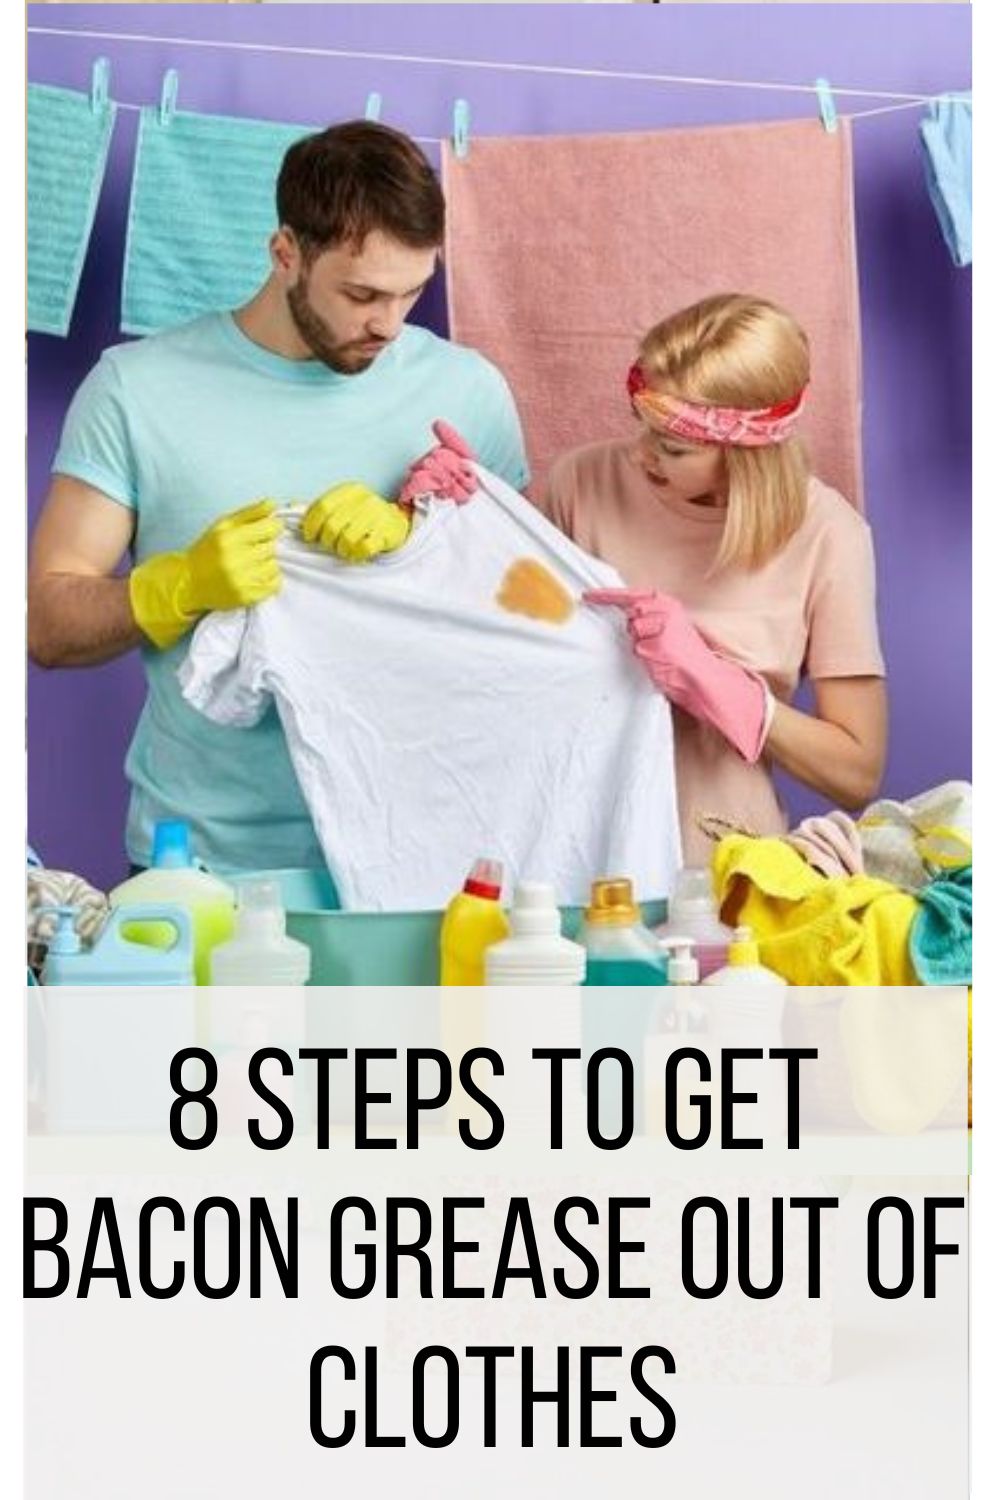 8 Steps to Get Bacon Grease Out of Clothes